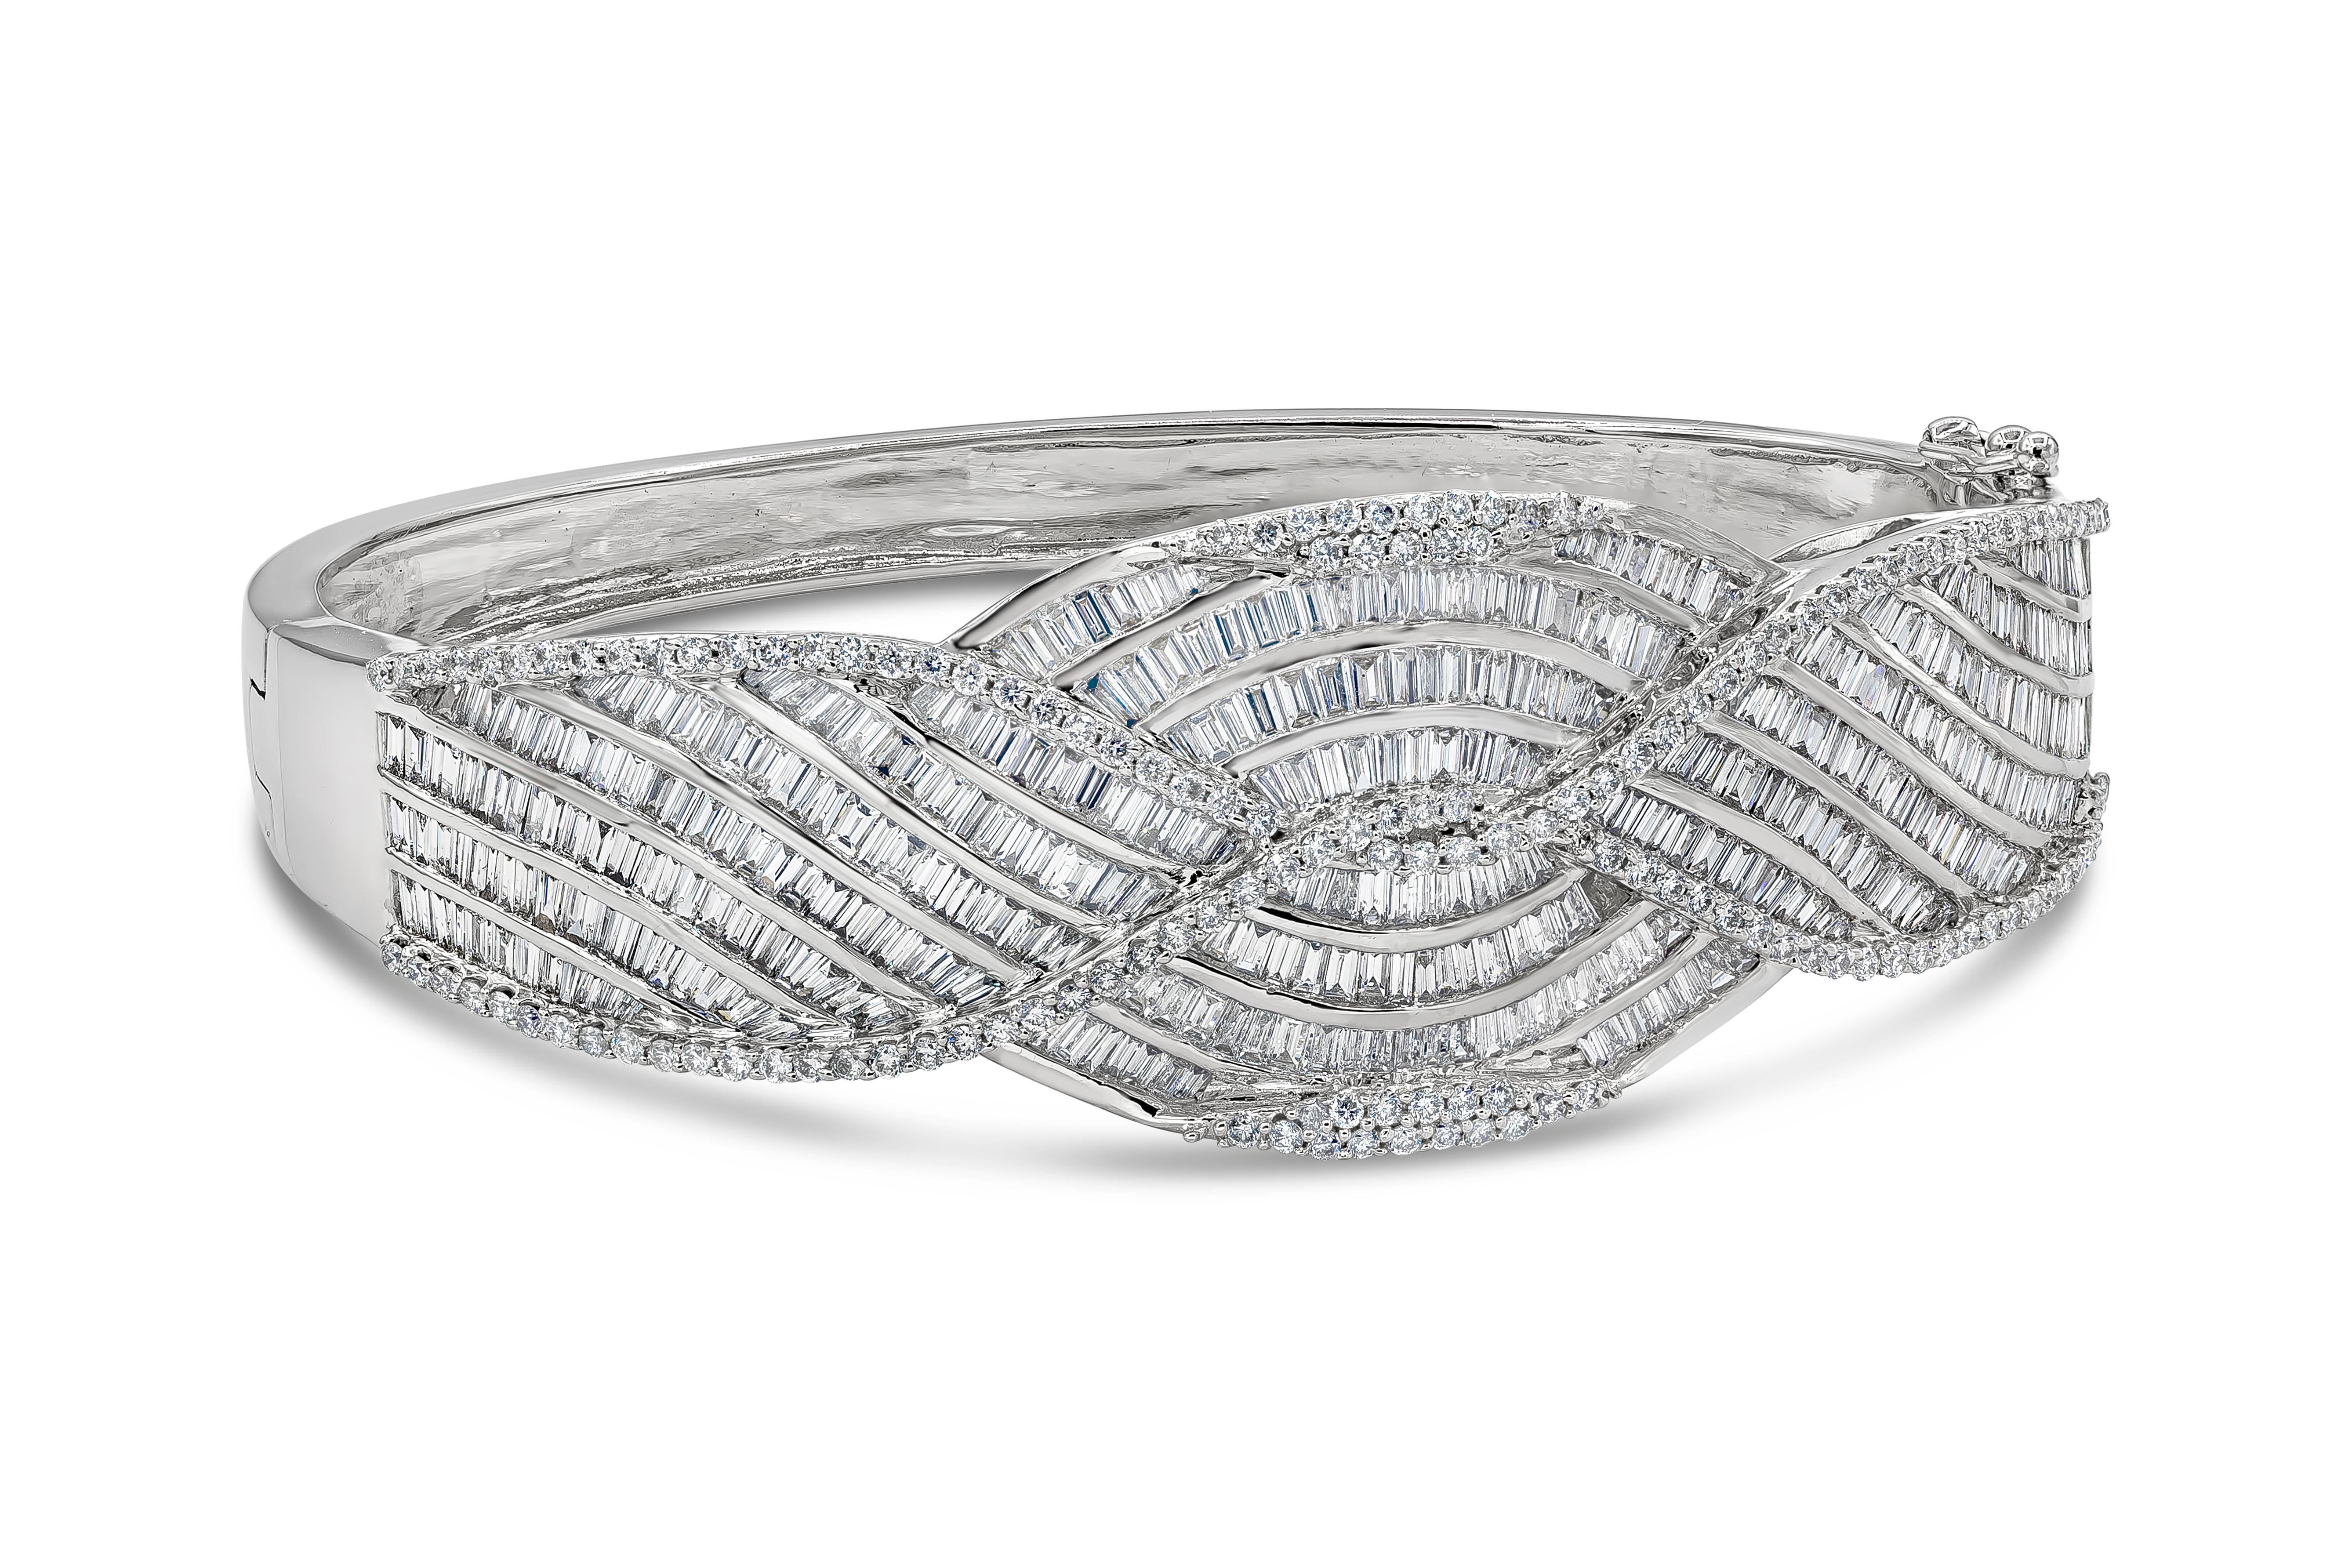 An exquisite and labor intensive design features a cluster of baguette diamonds weighing 11.58 carats total , set in an angled weave design, embellished with brilliant round diamonds weighing 1.45 carats total. Finely made in 18K White Gold. 

